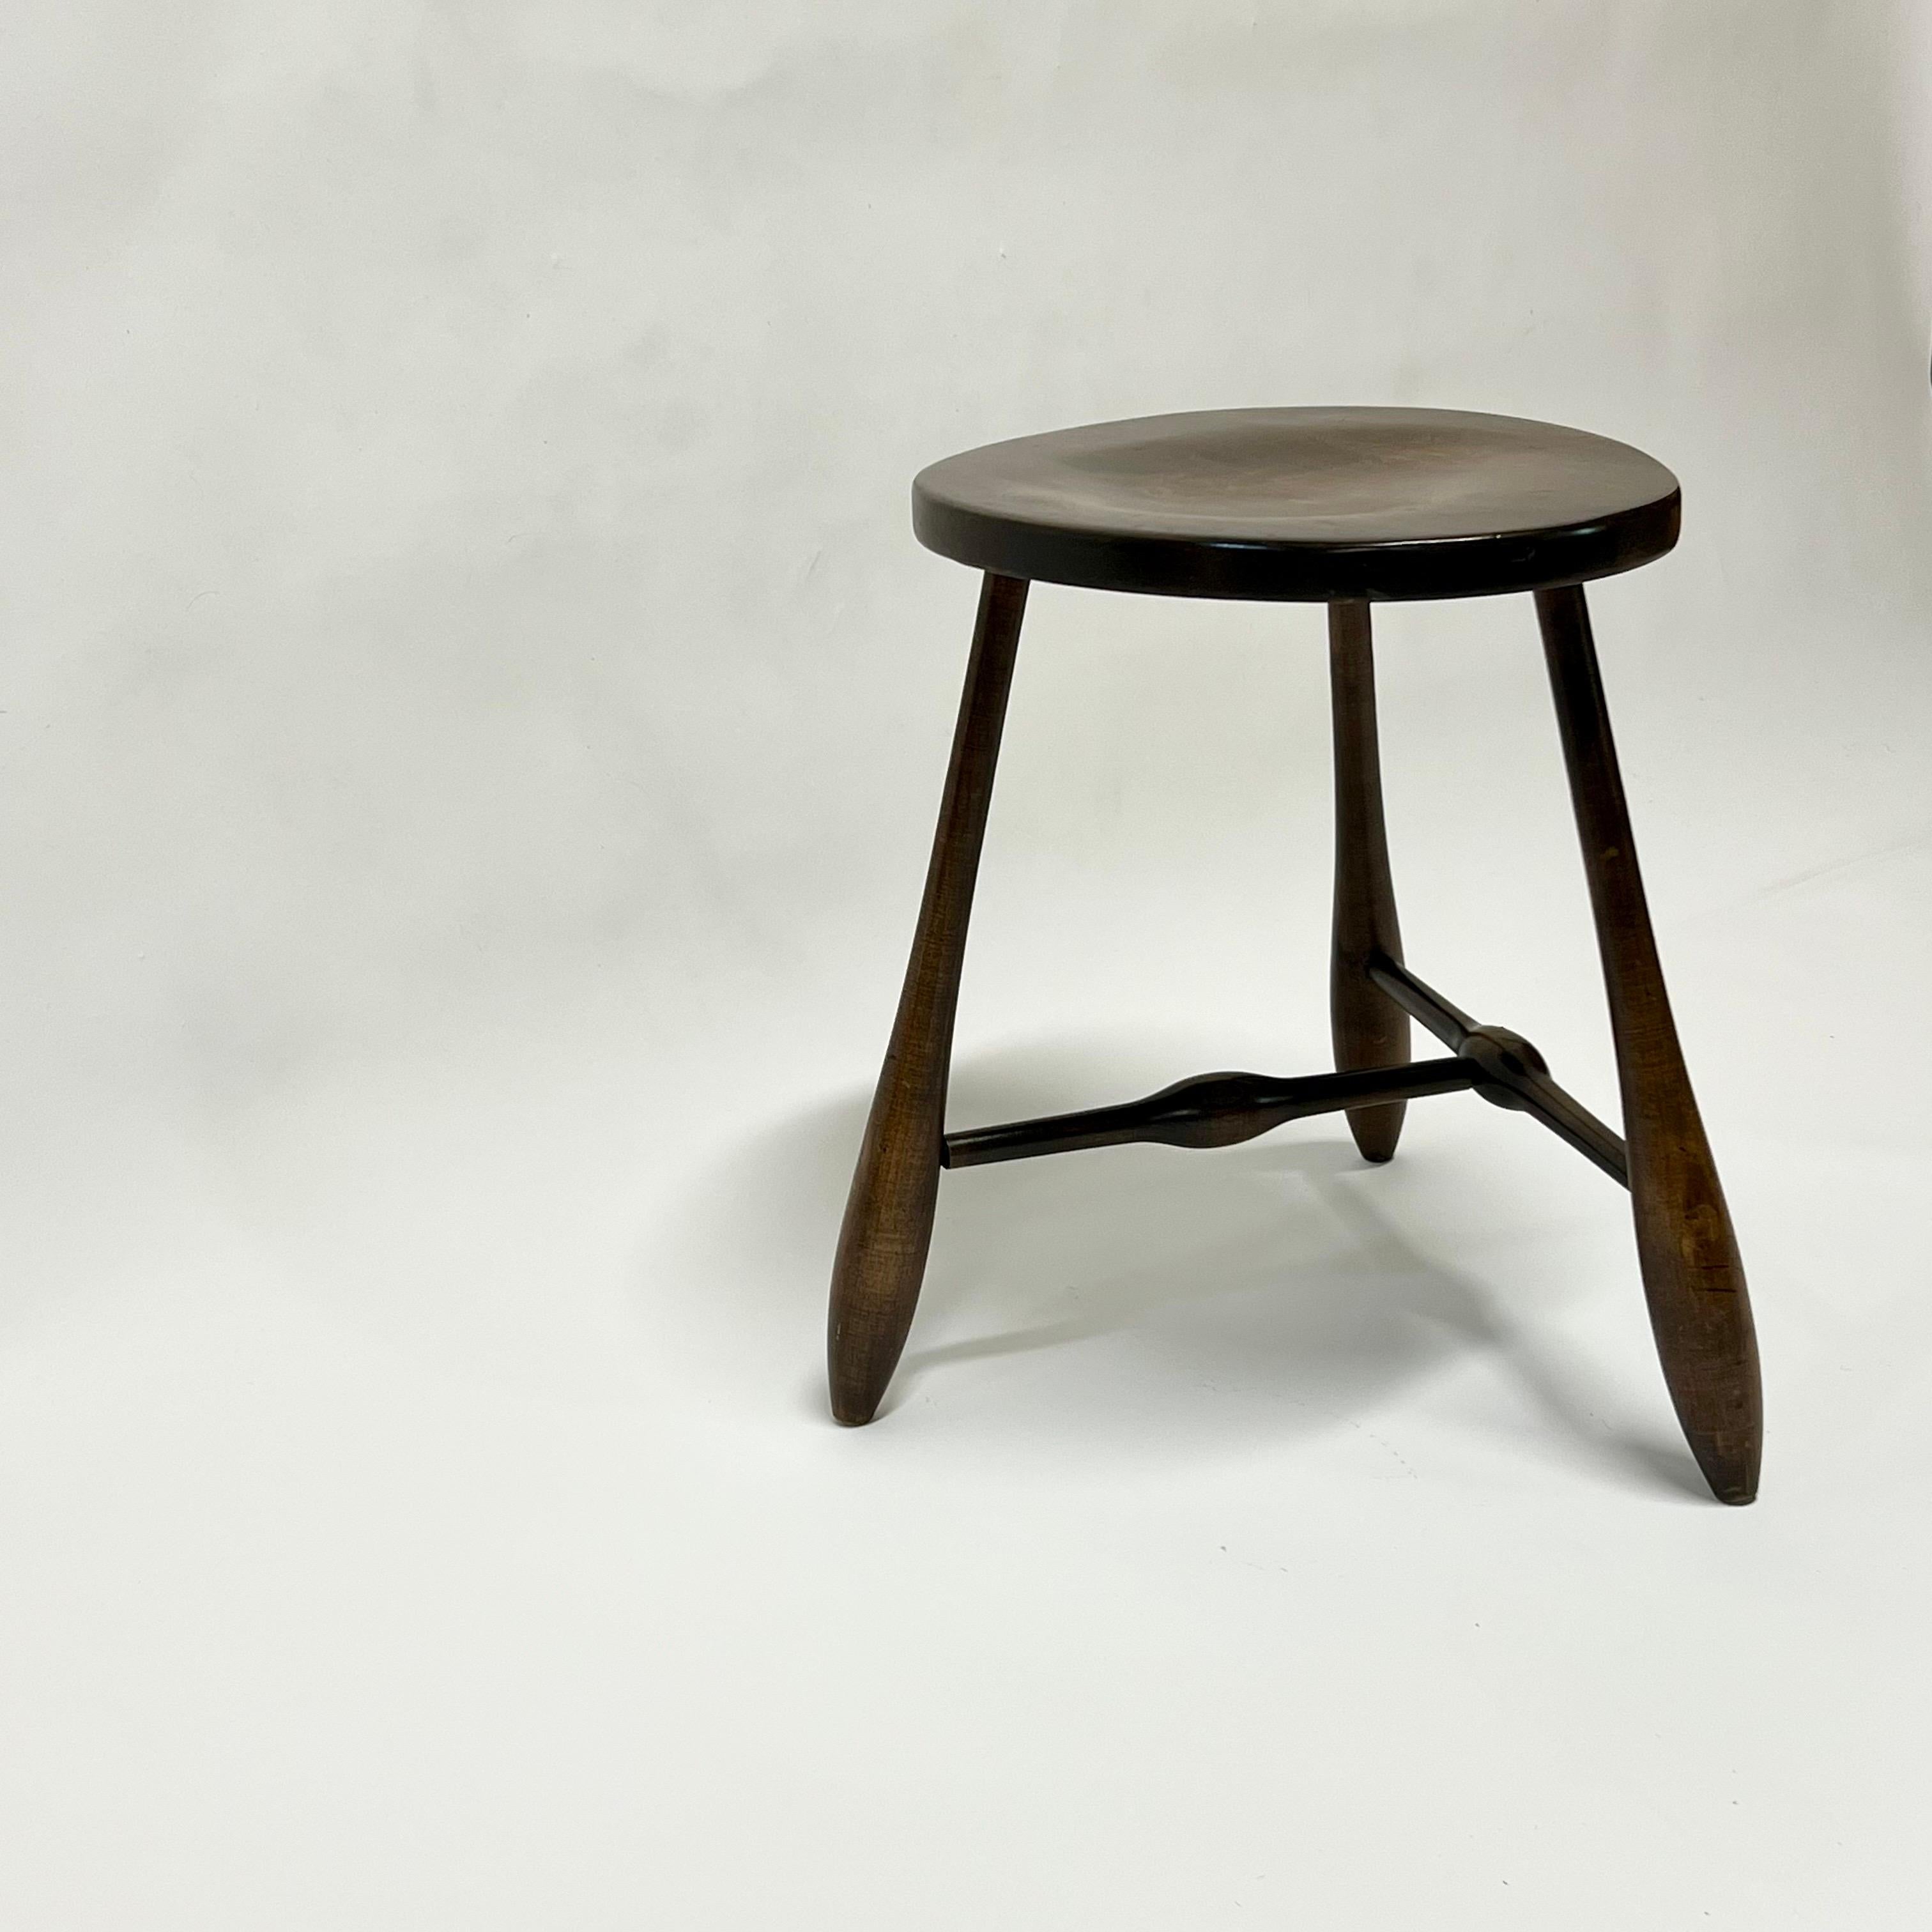 Mid-20th Century Vintage Tripod Stool by Hale of Vermont c1960s For Sale